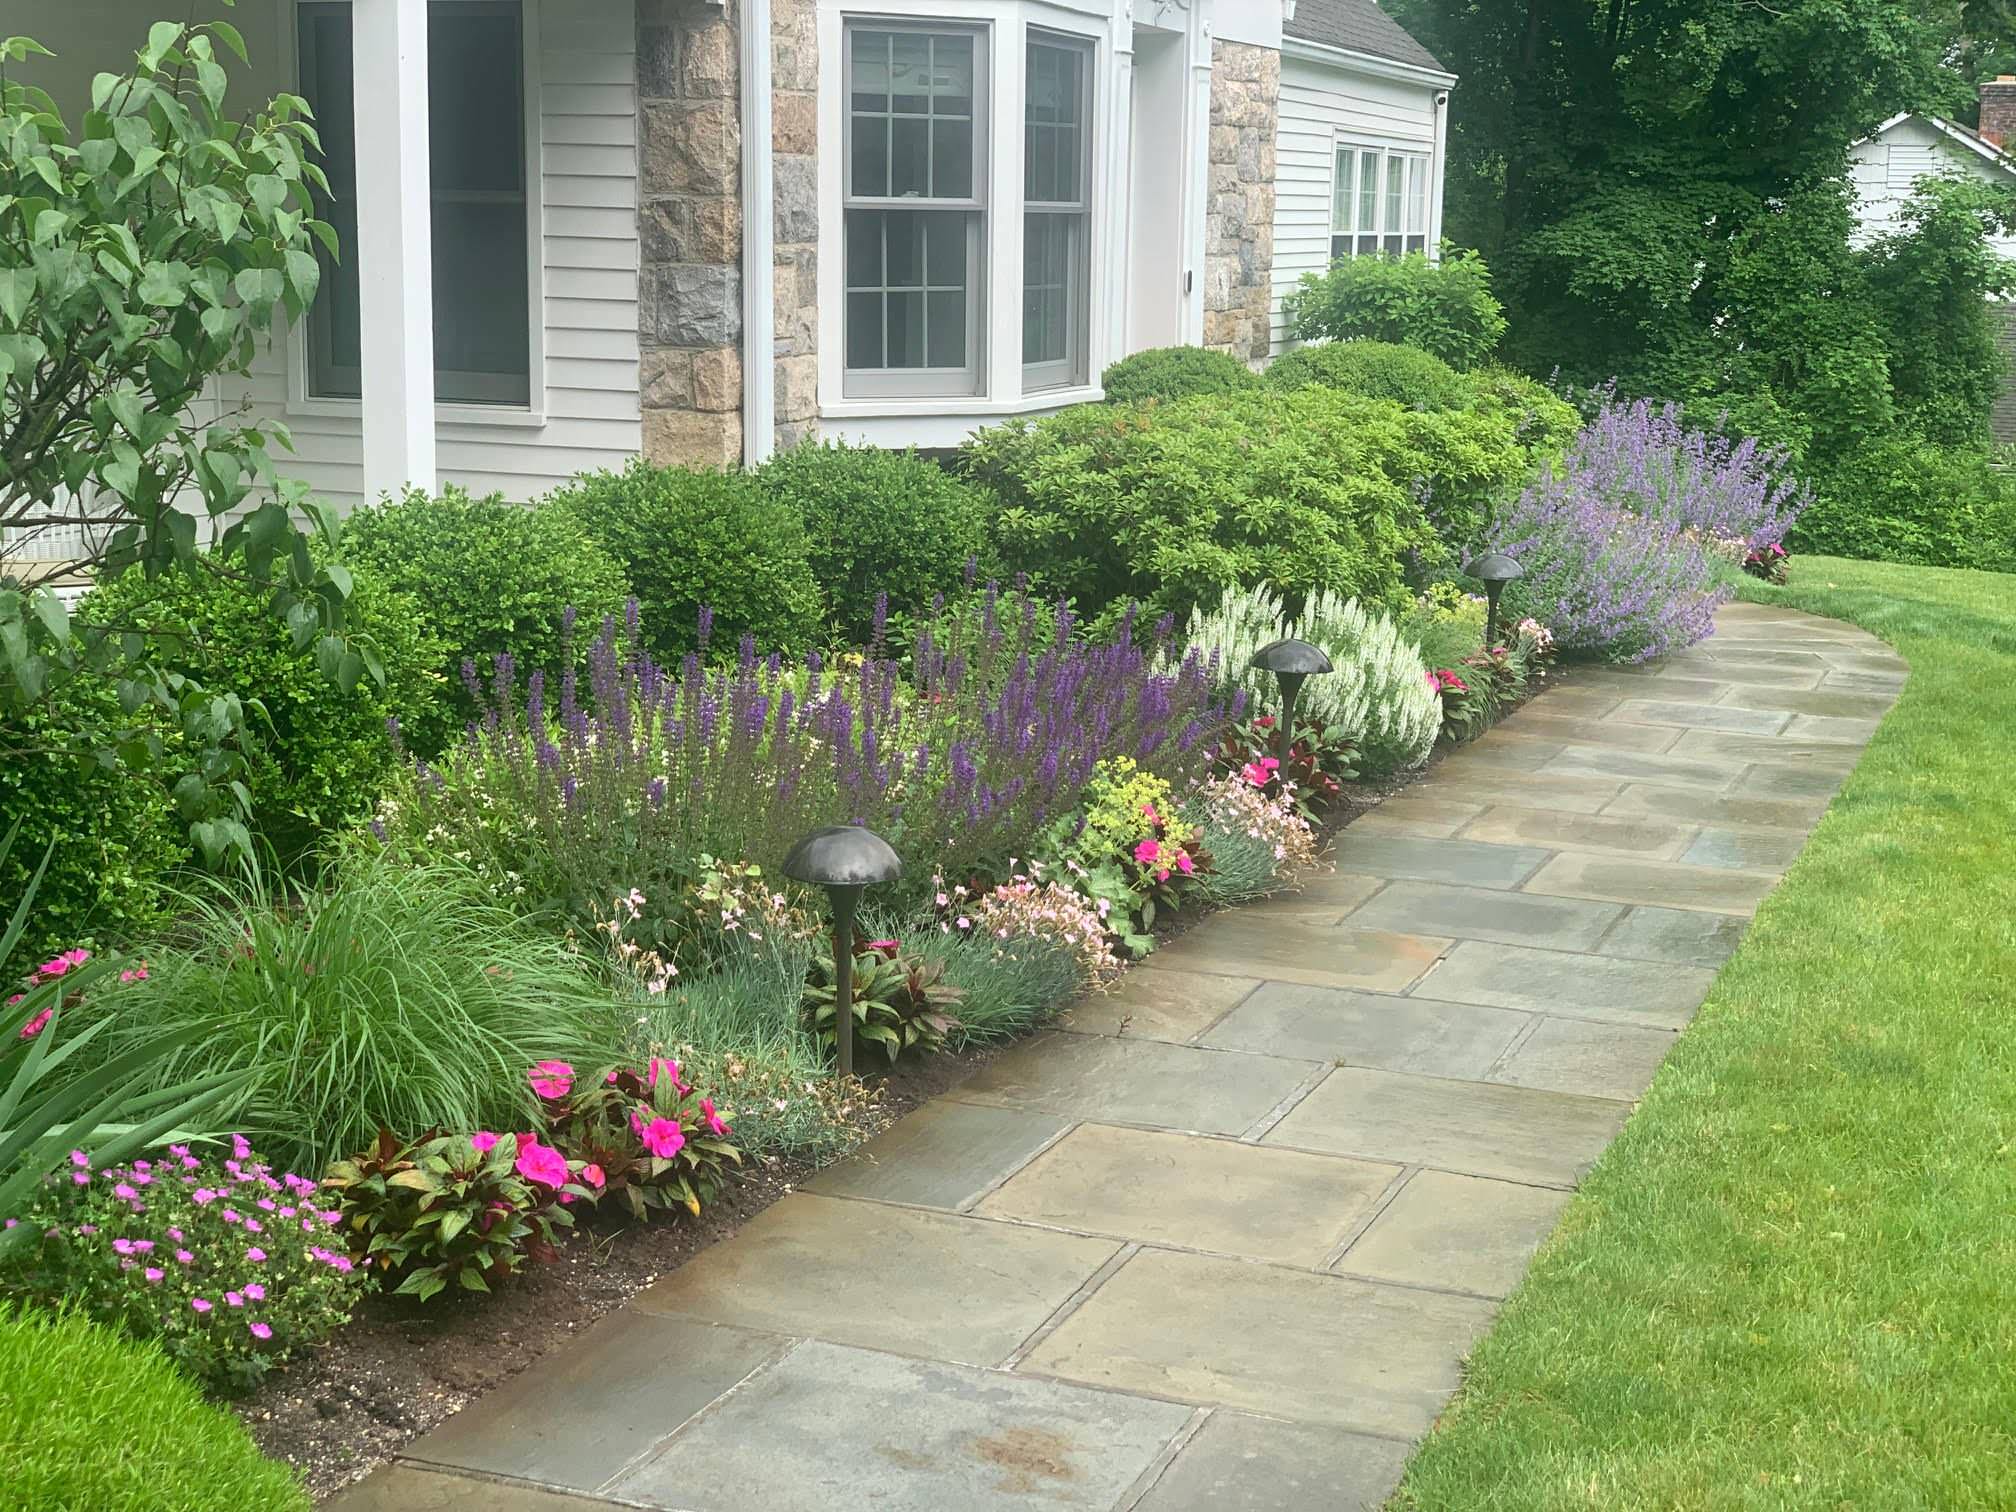 Foundation Perennials heading the the front door by Peter Atkins and Associates